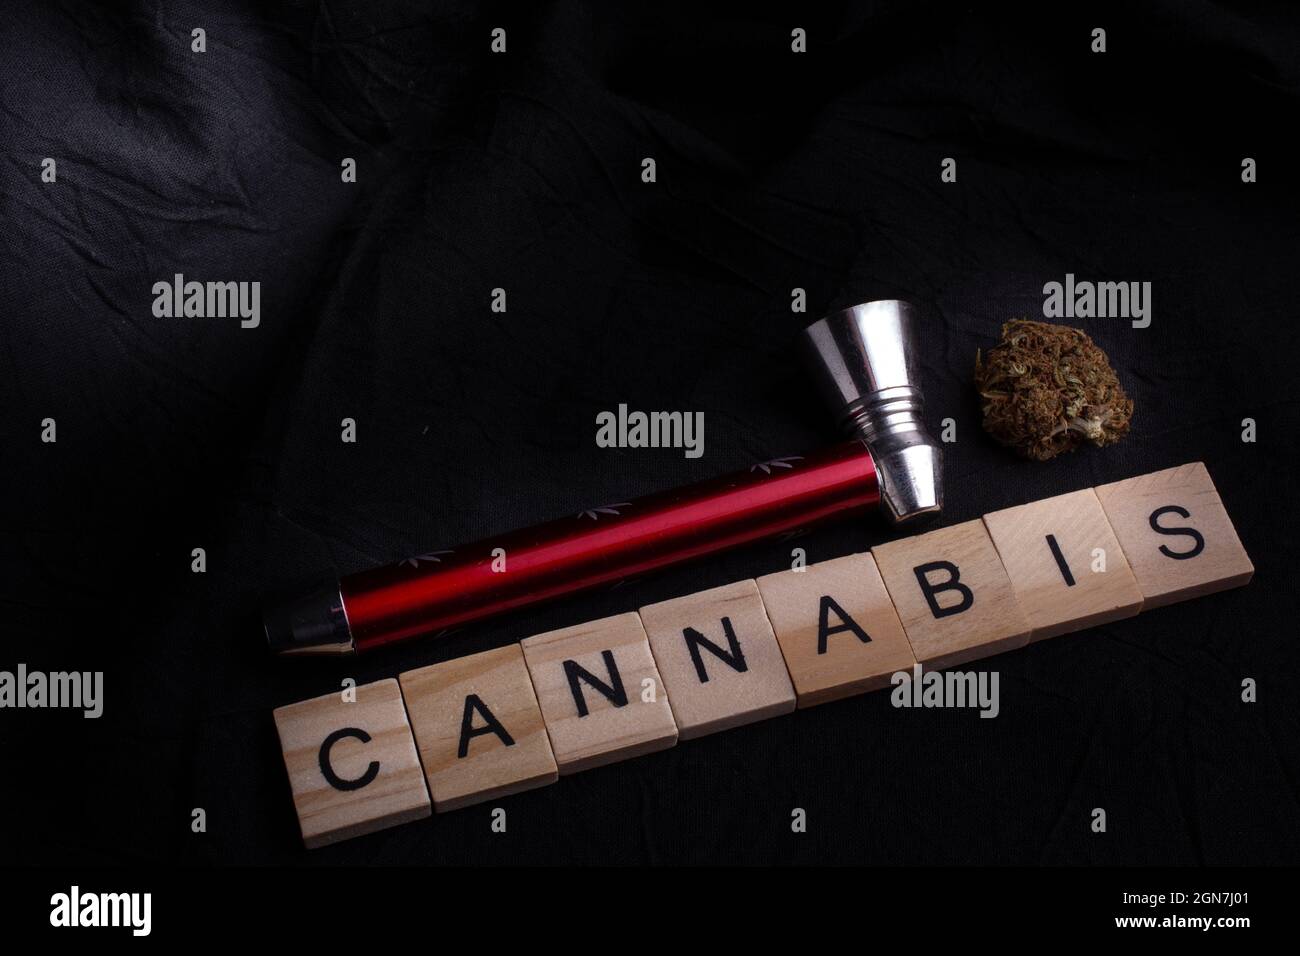 Close-Up Of Cannabis bud With Pipe, black background and cannabis text. Cannabis legalisation. Stock Photo